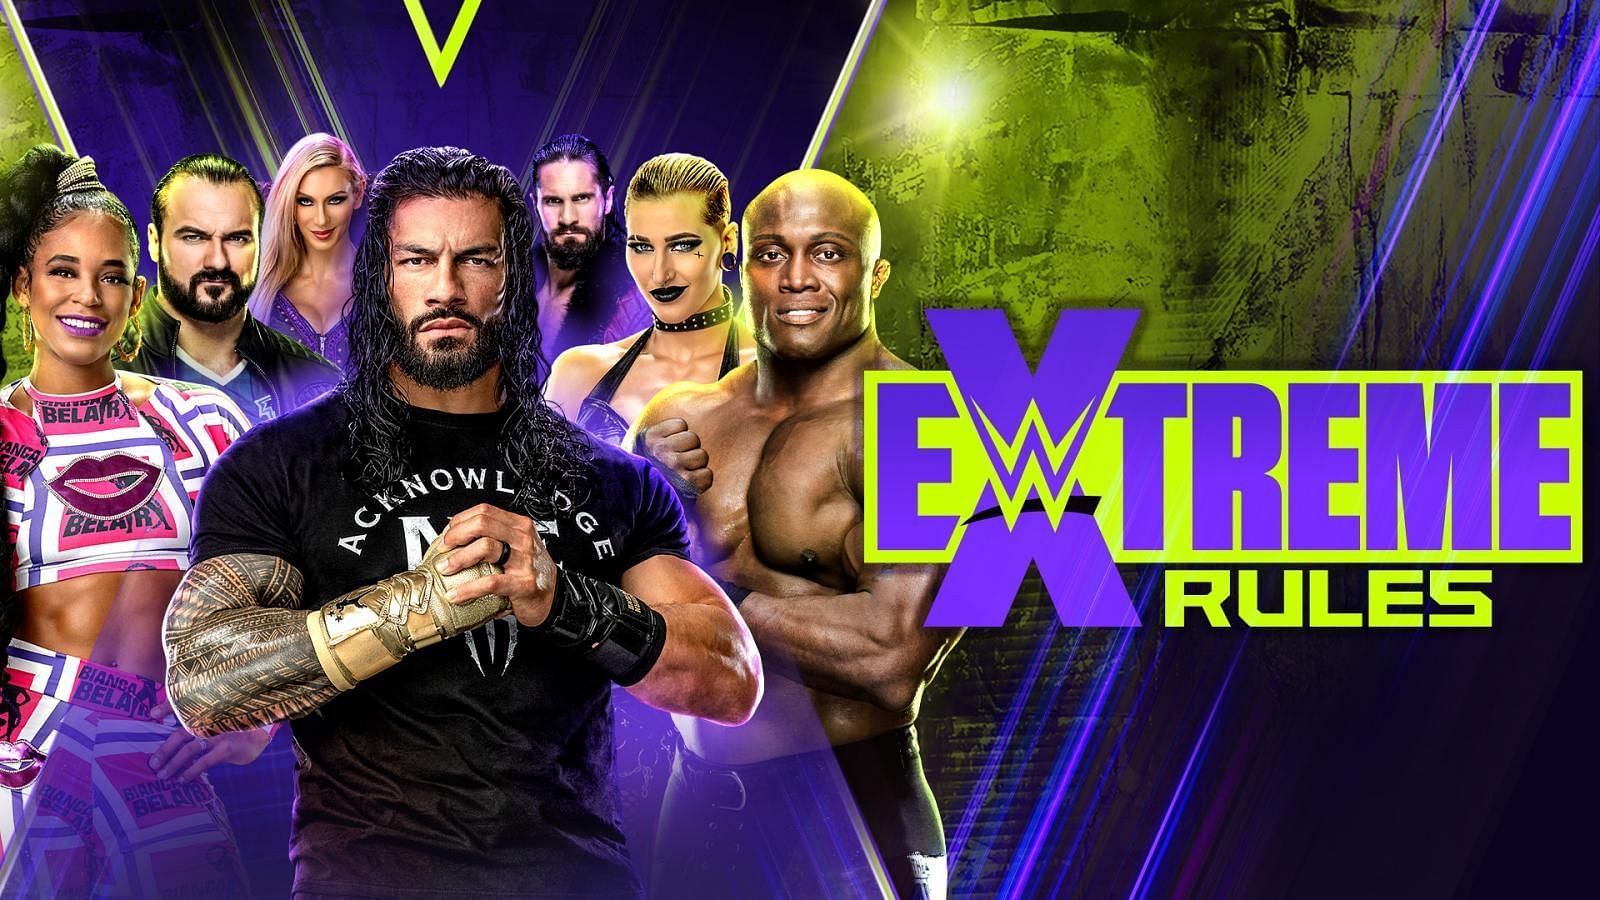 Potential Spoiler on WWE Extreme Rules main event